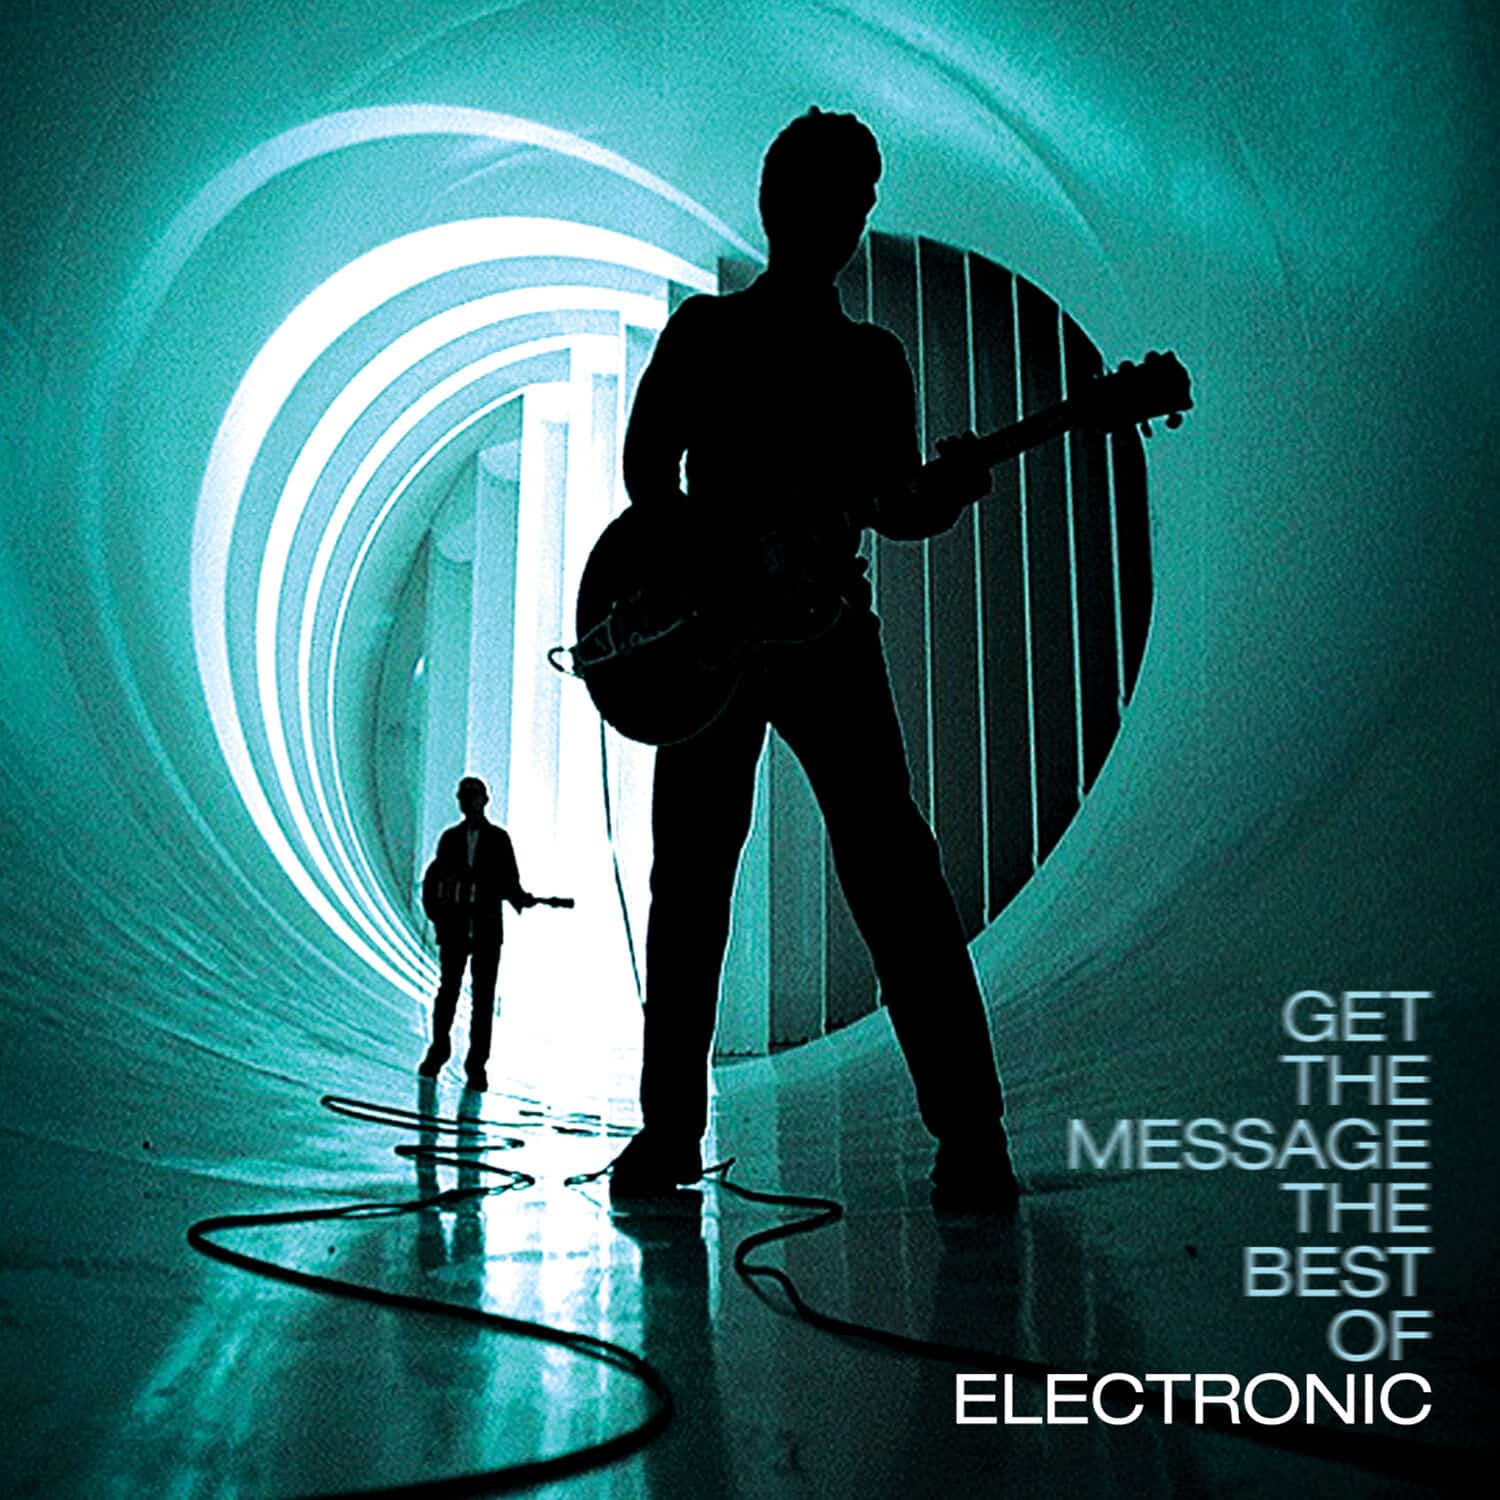 Electronic-Get-The-Message-The-Best-Of-Electronic.jpg